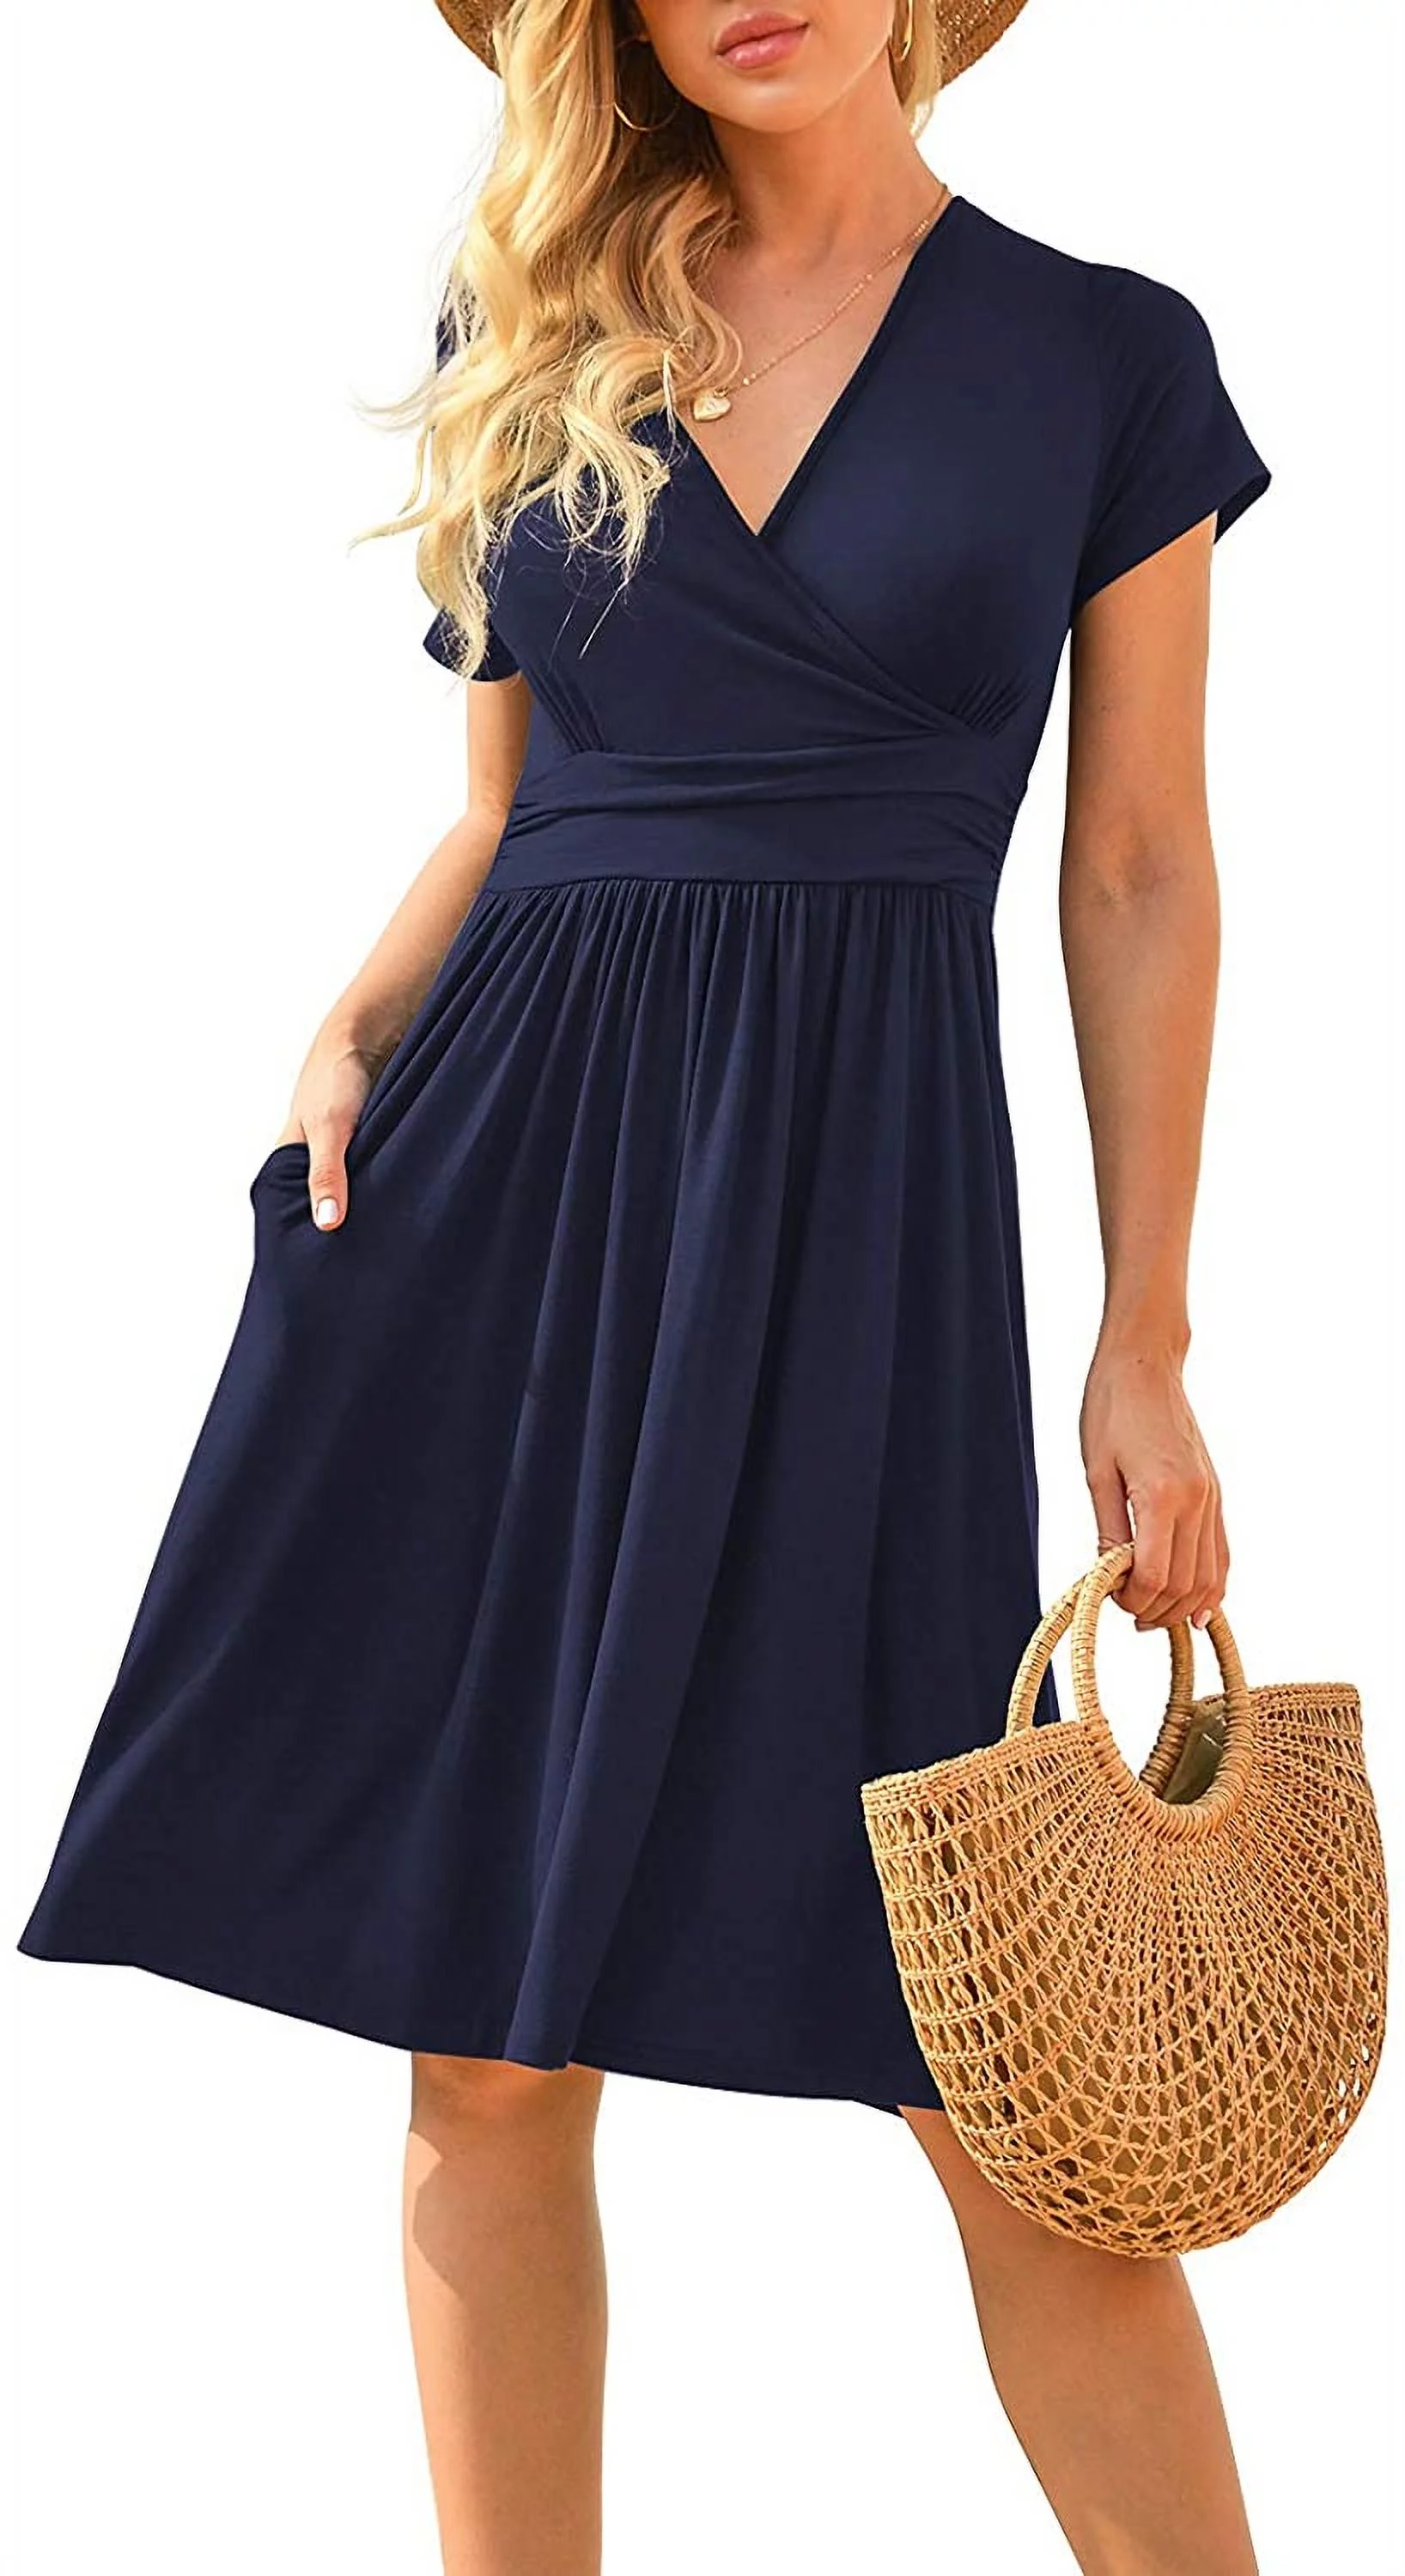 PPYOUNG Women's Summer Casual Short Sleeve V-Neck Short Party Dress with Pockets Navy Blue S